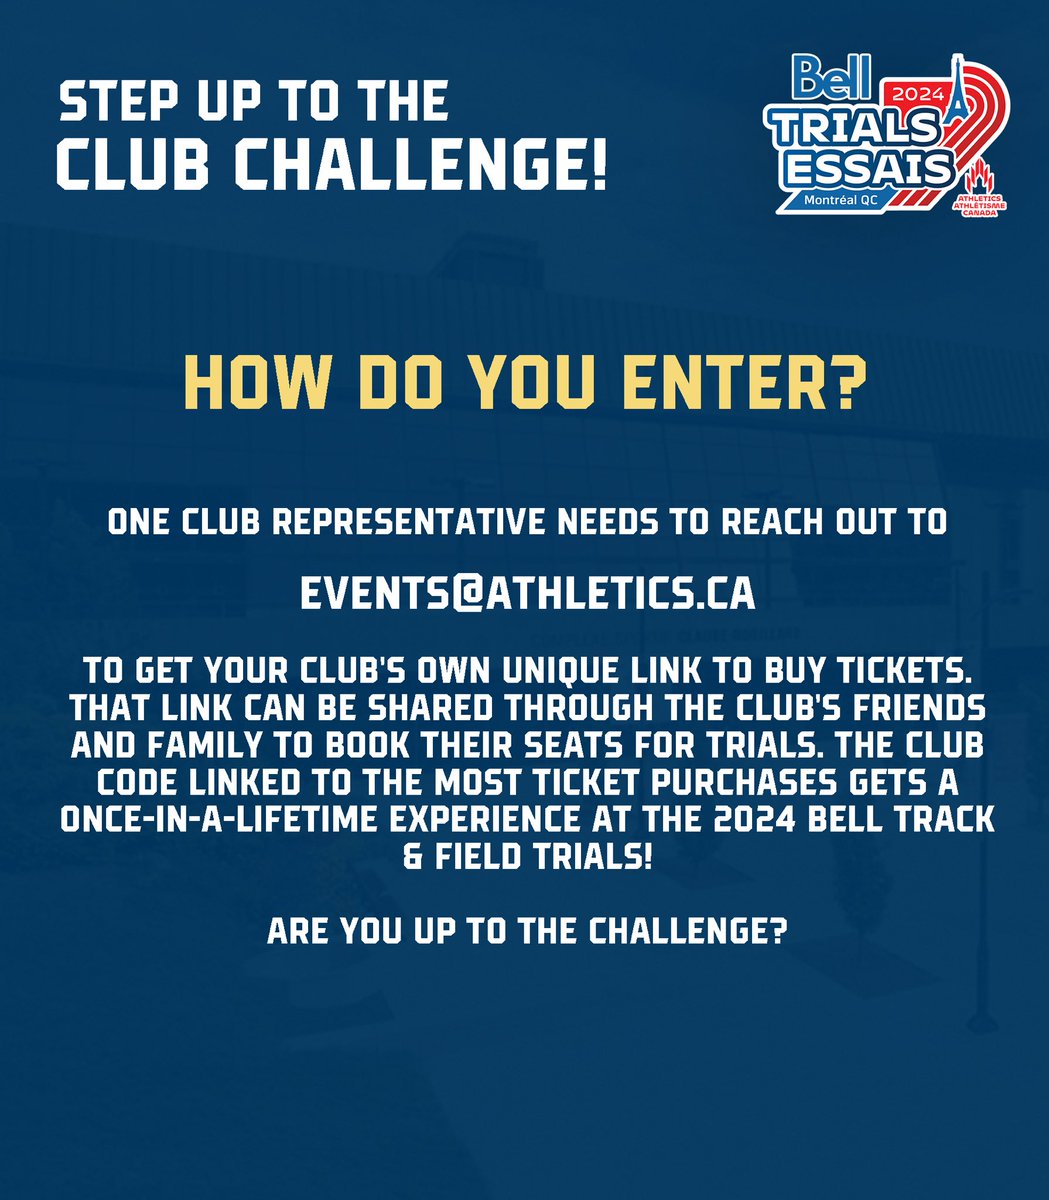 Step up to the CLUB CHALLENGE 📣 Click the photos for details on how to enter to win!